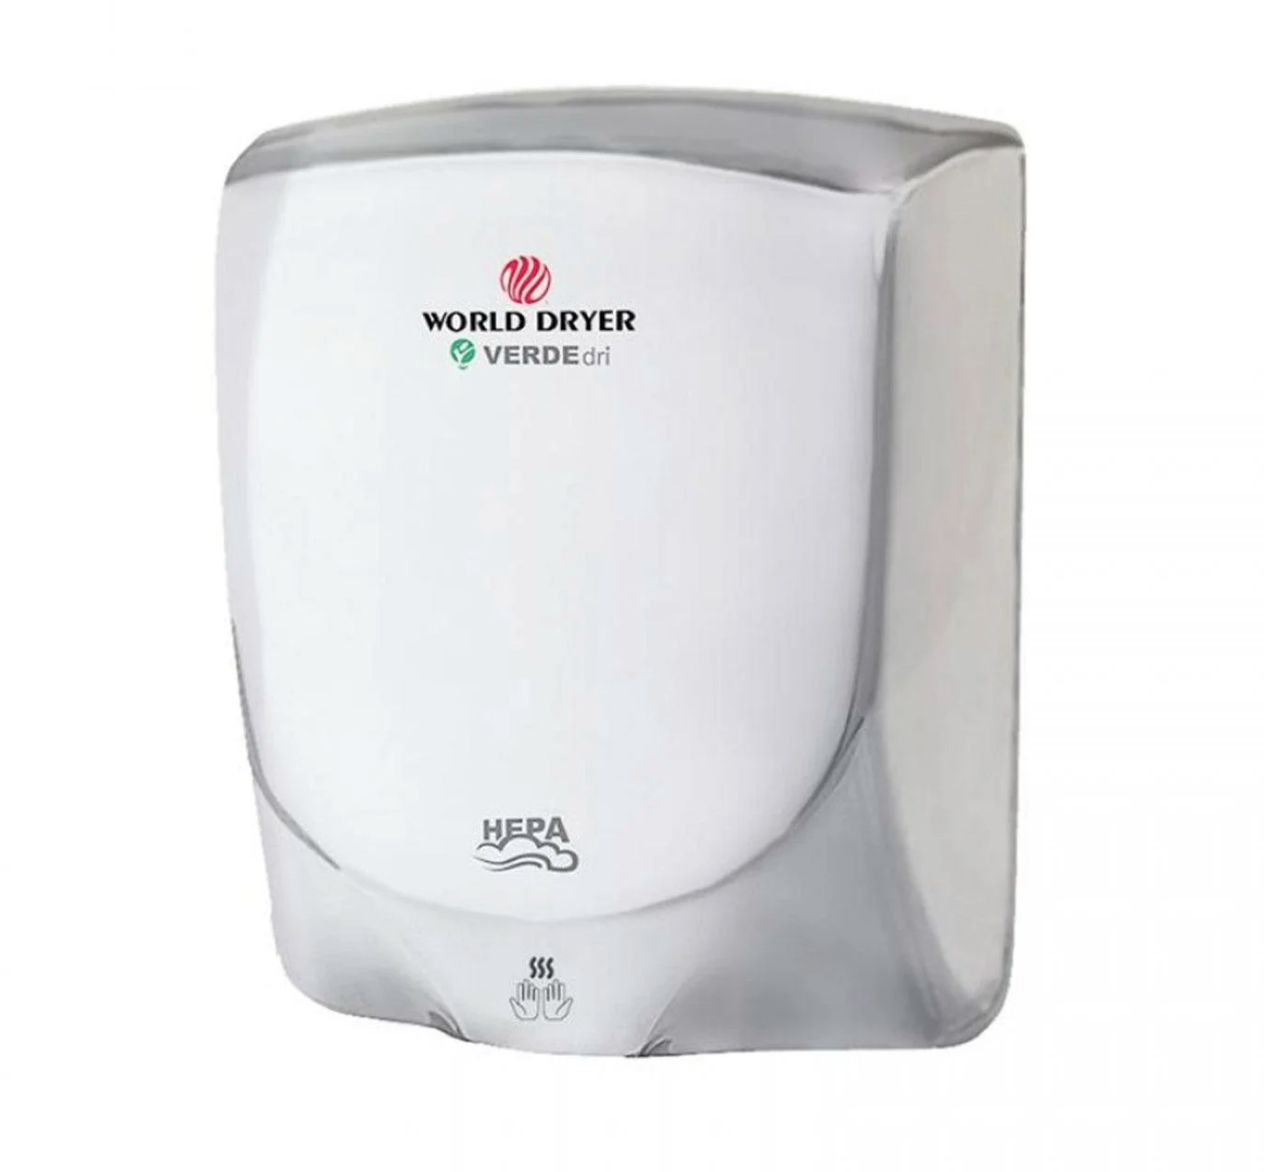 VerdeDri High Speed Low Energy Hand Dryer - HEPA Filtered - Polished Stainless Steel - Q-972A